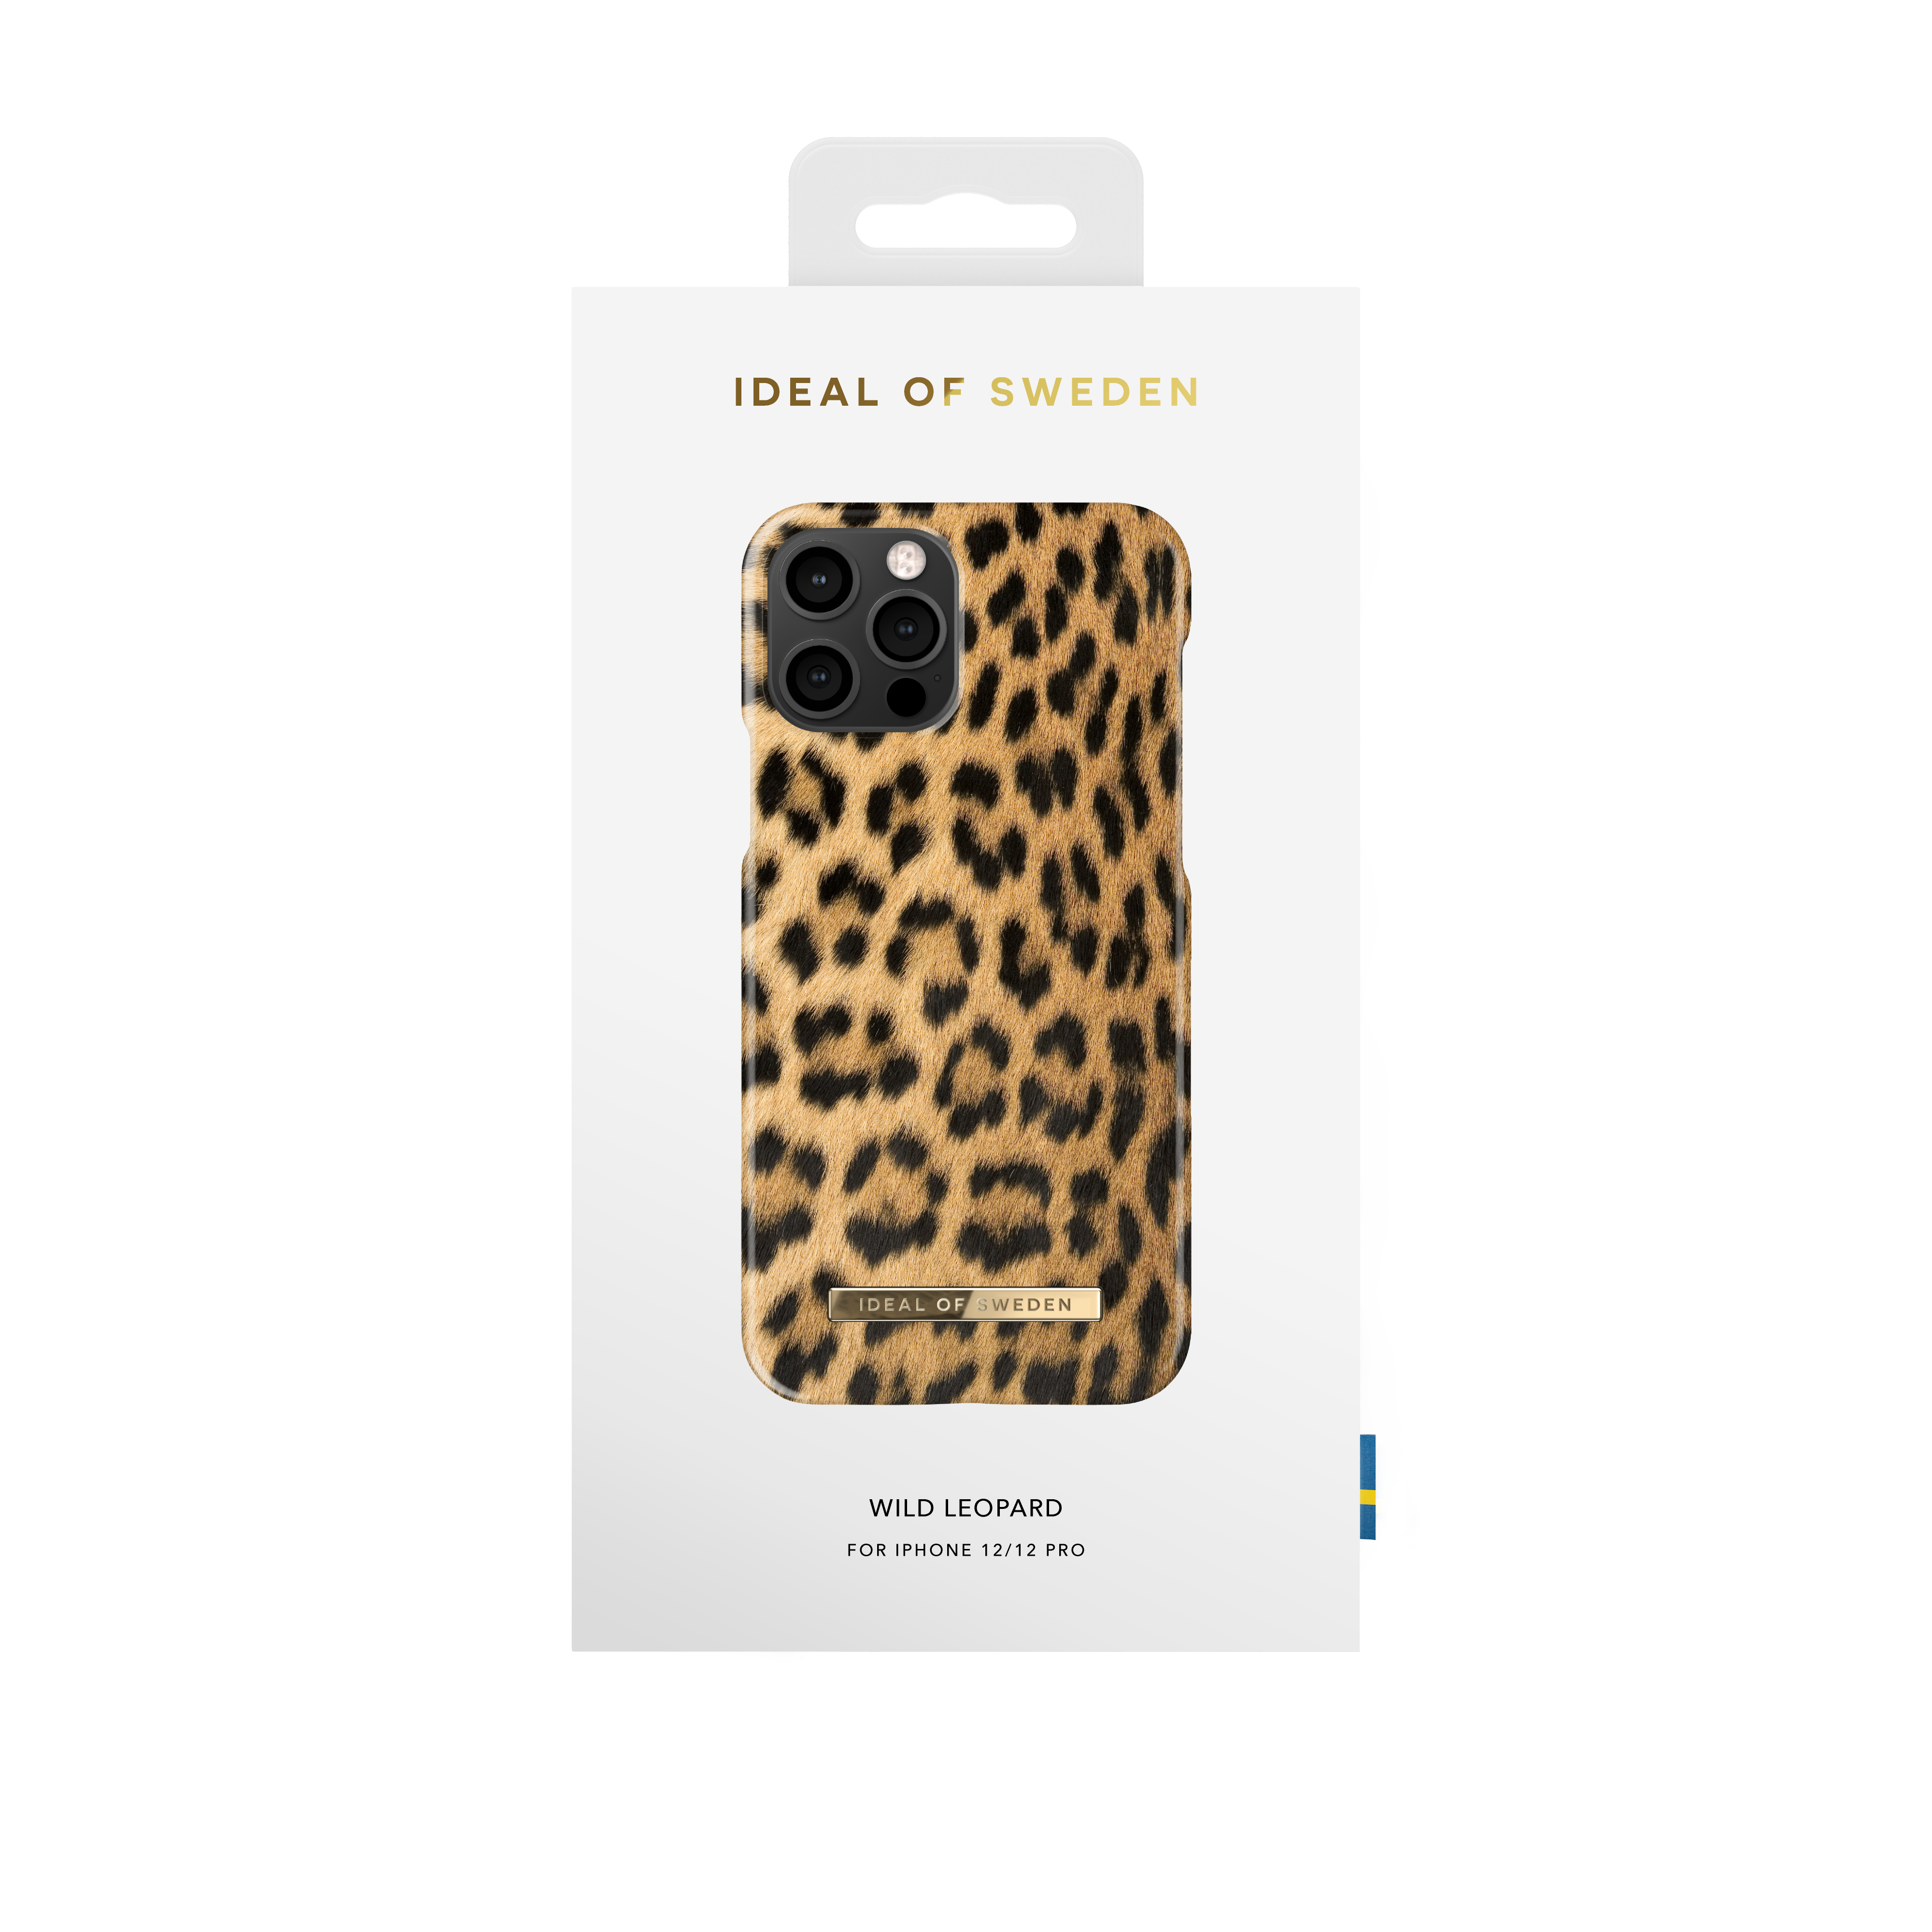 IDEAL Pro, OF iPhone 12, Backcover, iPhone IDFCS17-I2061-67, 12 Apple, Wild SWEDEN Leopard